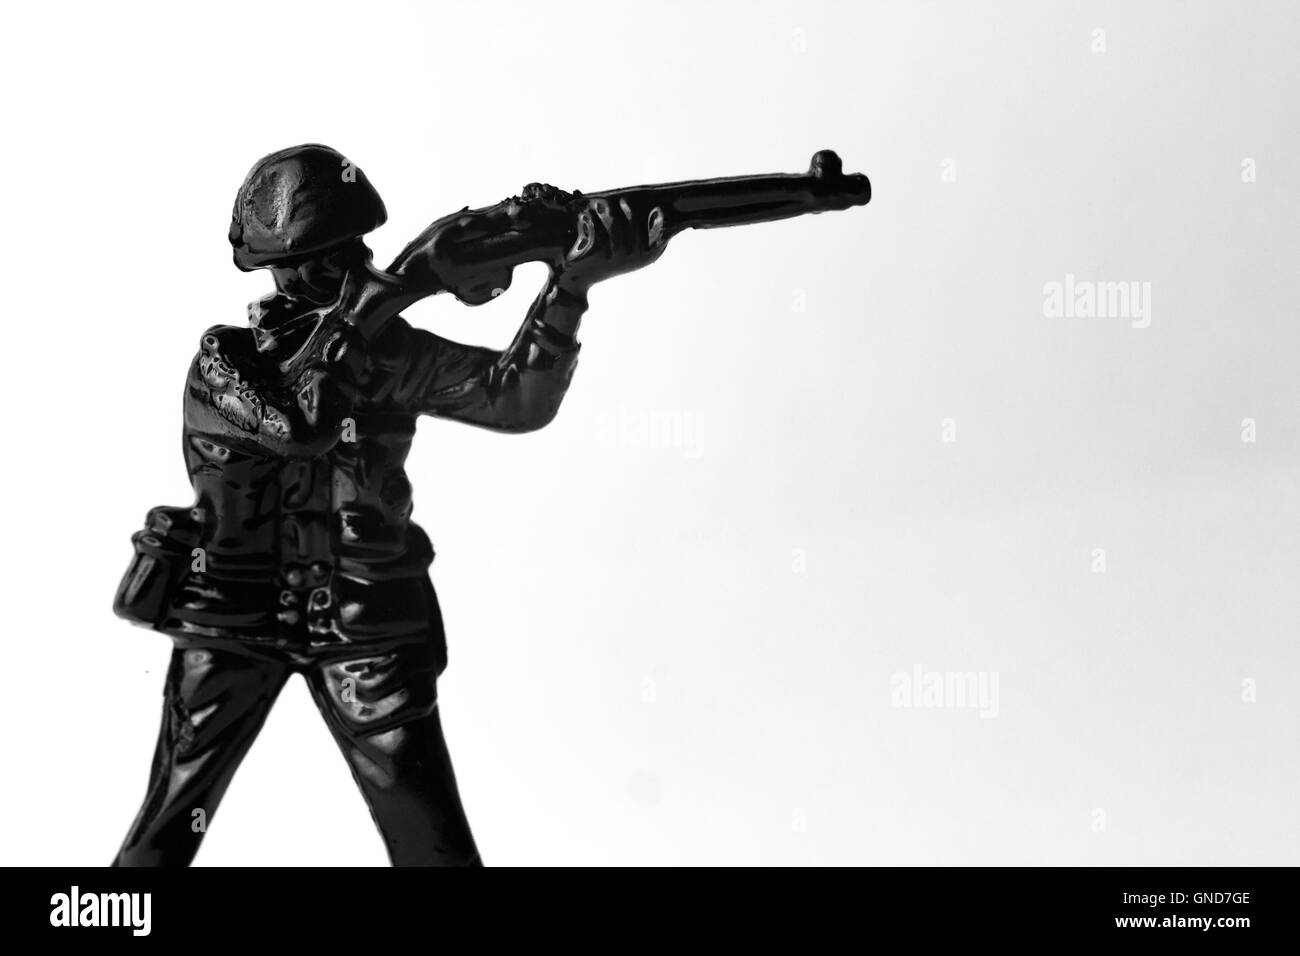 Dramatic toy army soldier aiming rifle in black and white image Stock Photo